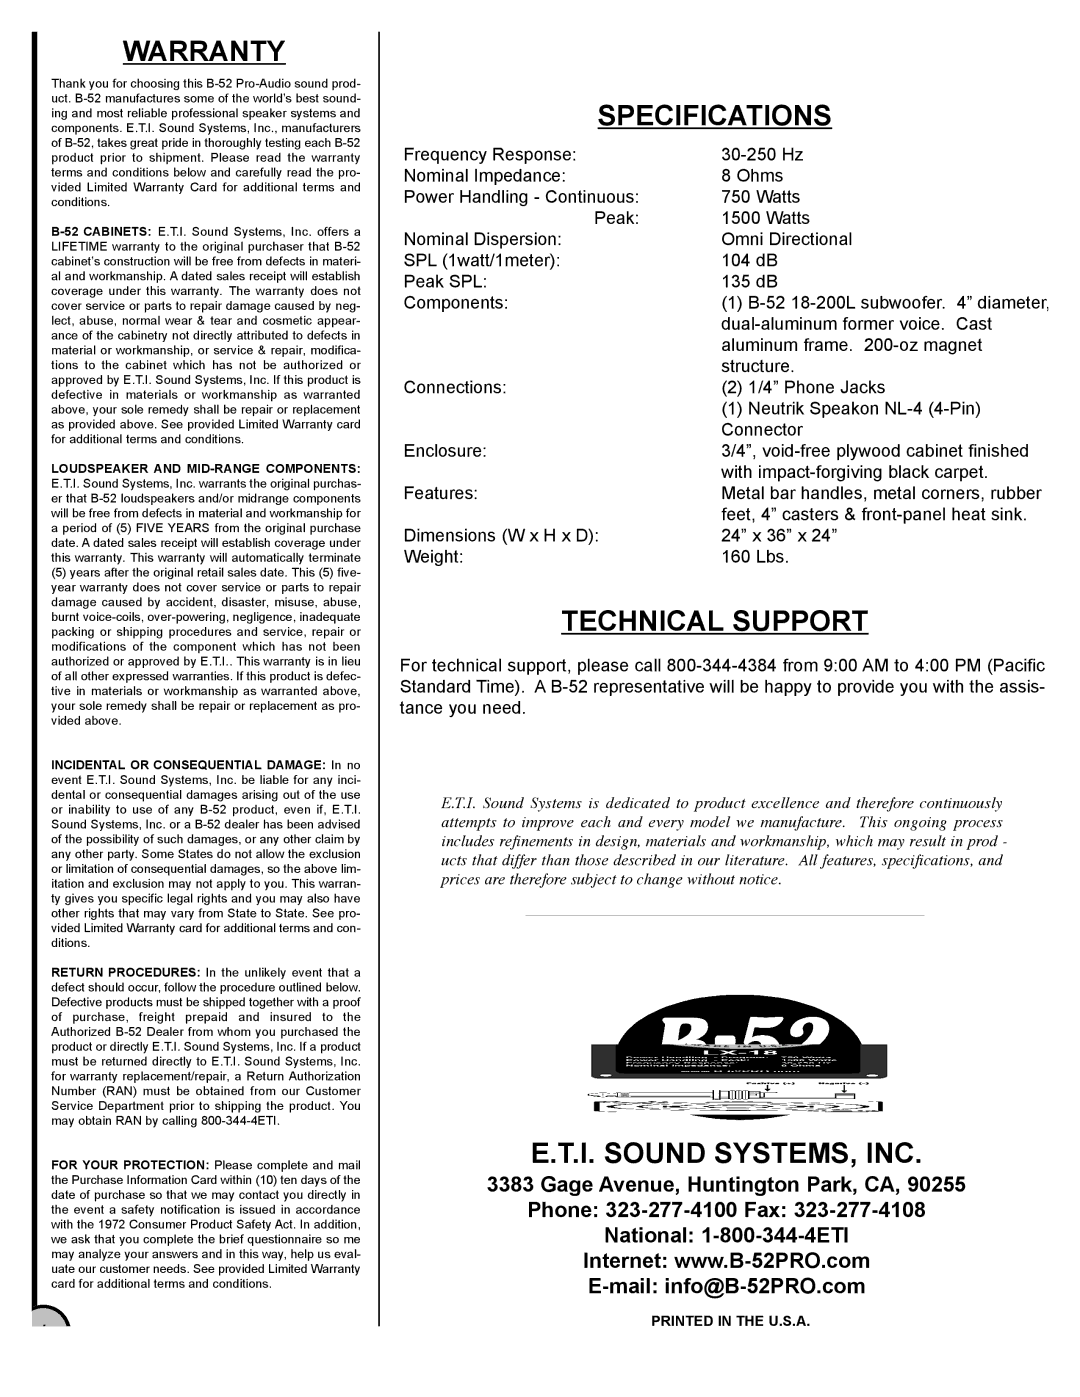 ETI Sound Systems, INC LX-18 instruction manual Warranty, Specifications, Technical Support, I. Sound SYSTEMS, INC 